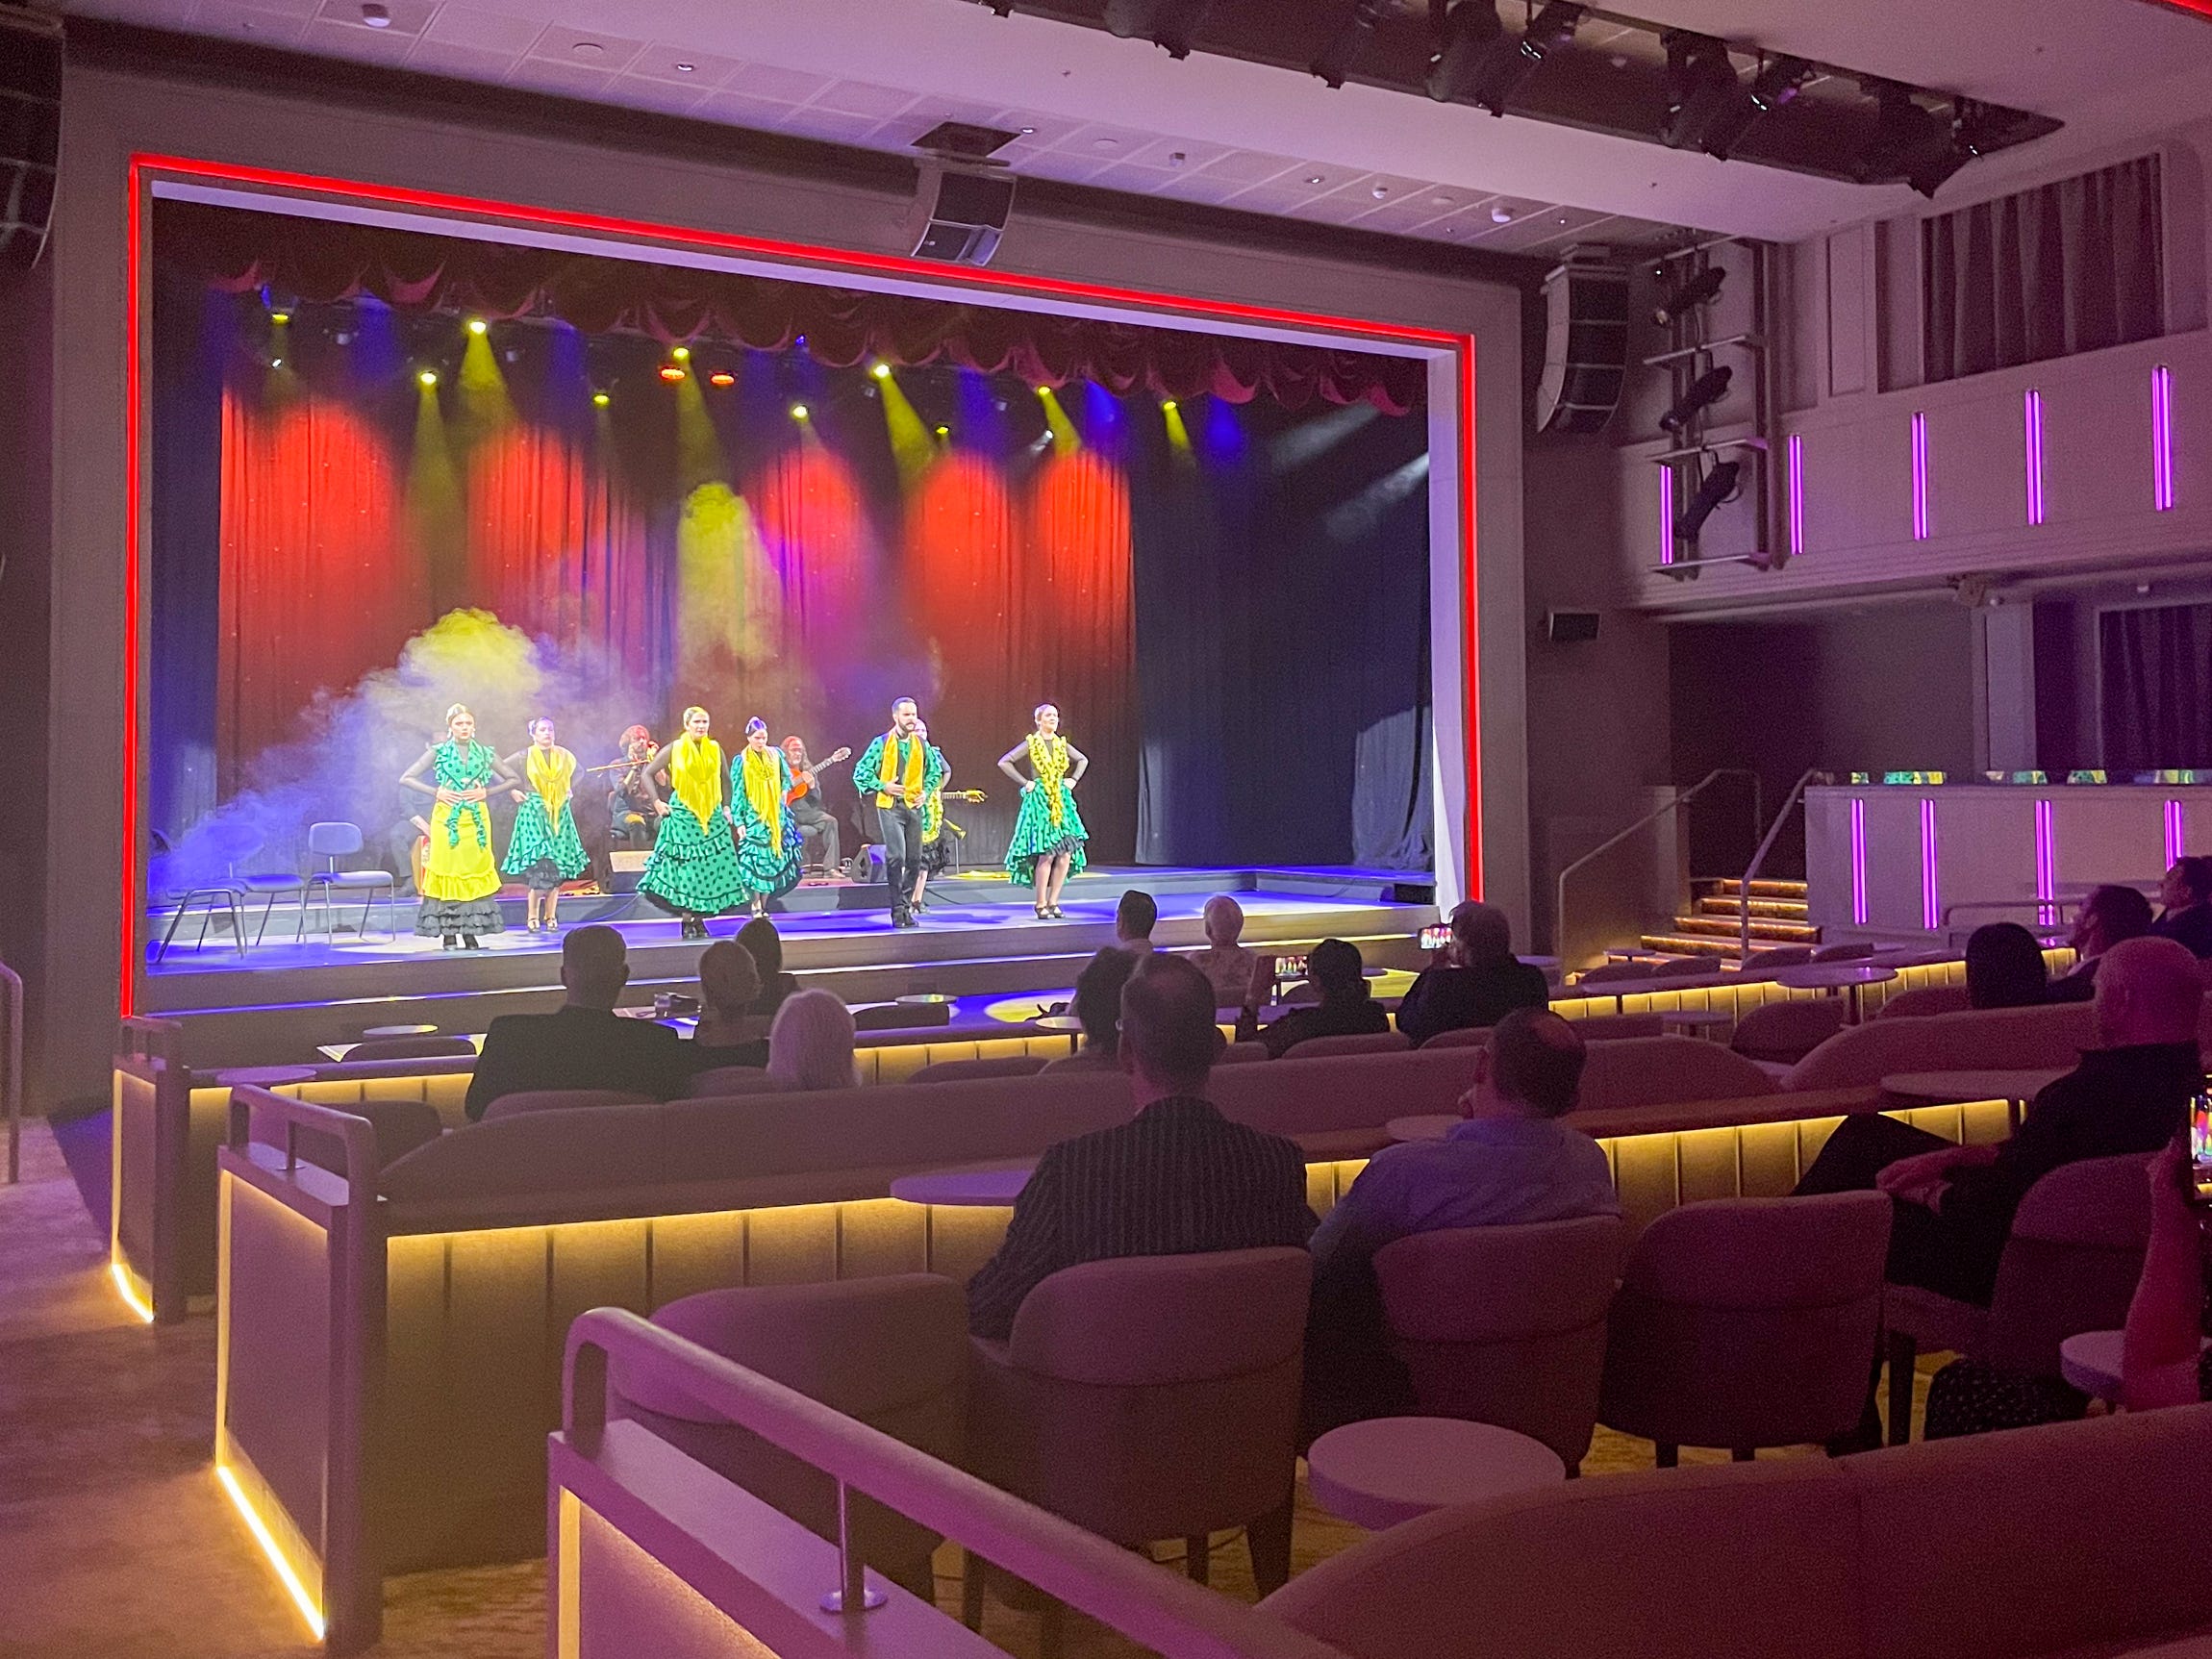 <p>Expect the typical song-and-dance cruise shows on Silver Ray, although the theater also hosts lectures and entertainment reflective of the ship's destinations.</p>